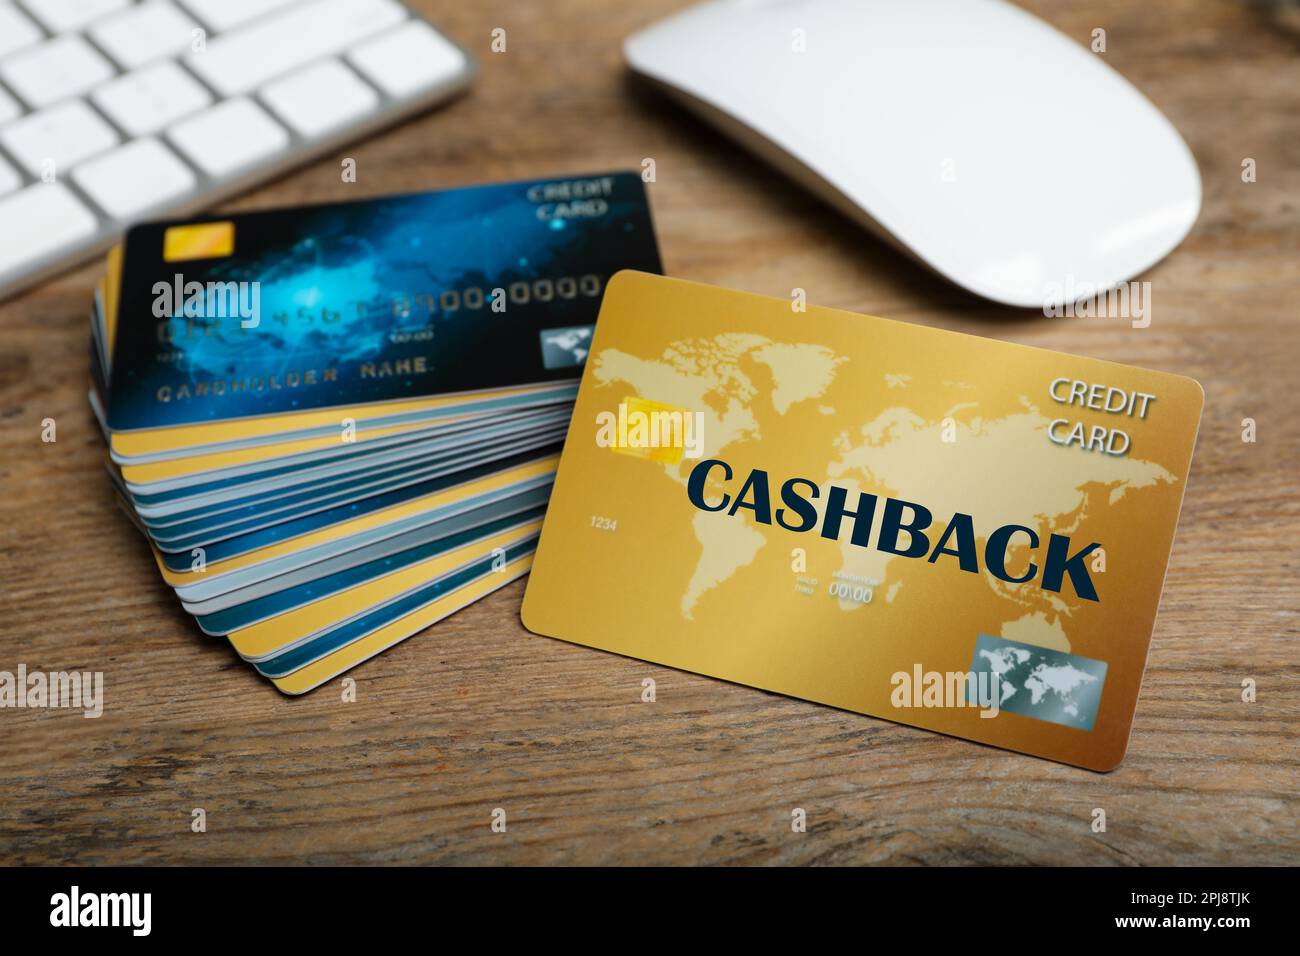 Cashback and credit cards on wooden table, closeup view Stock Photo